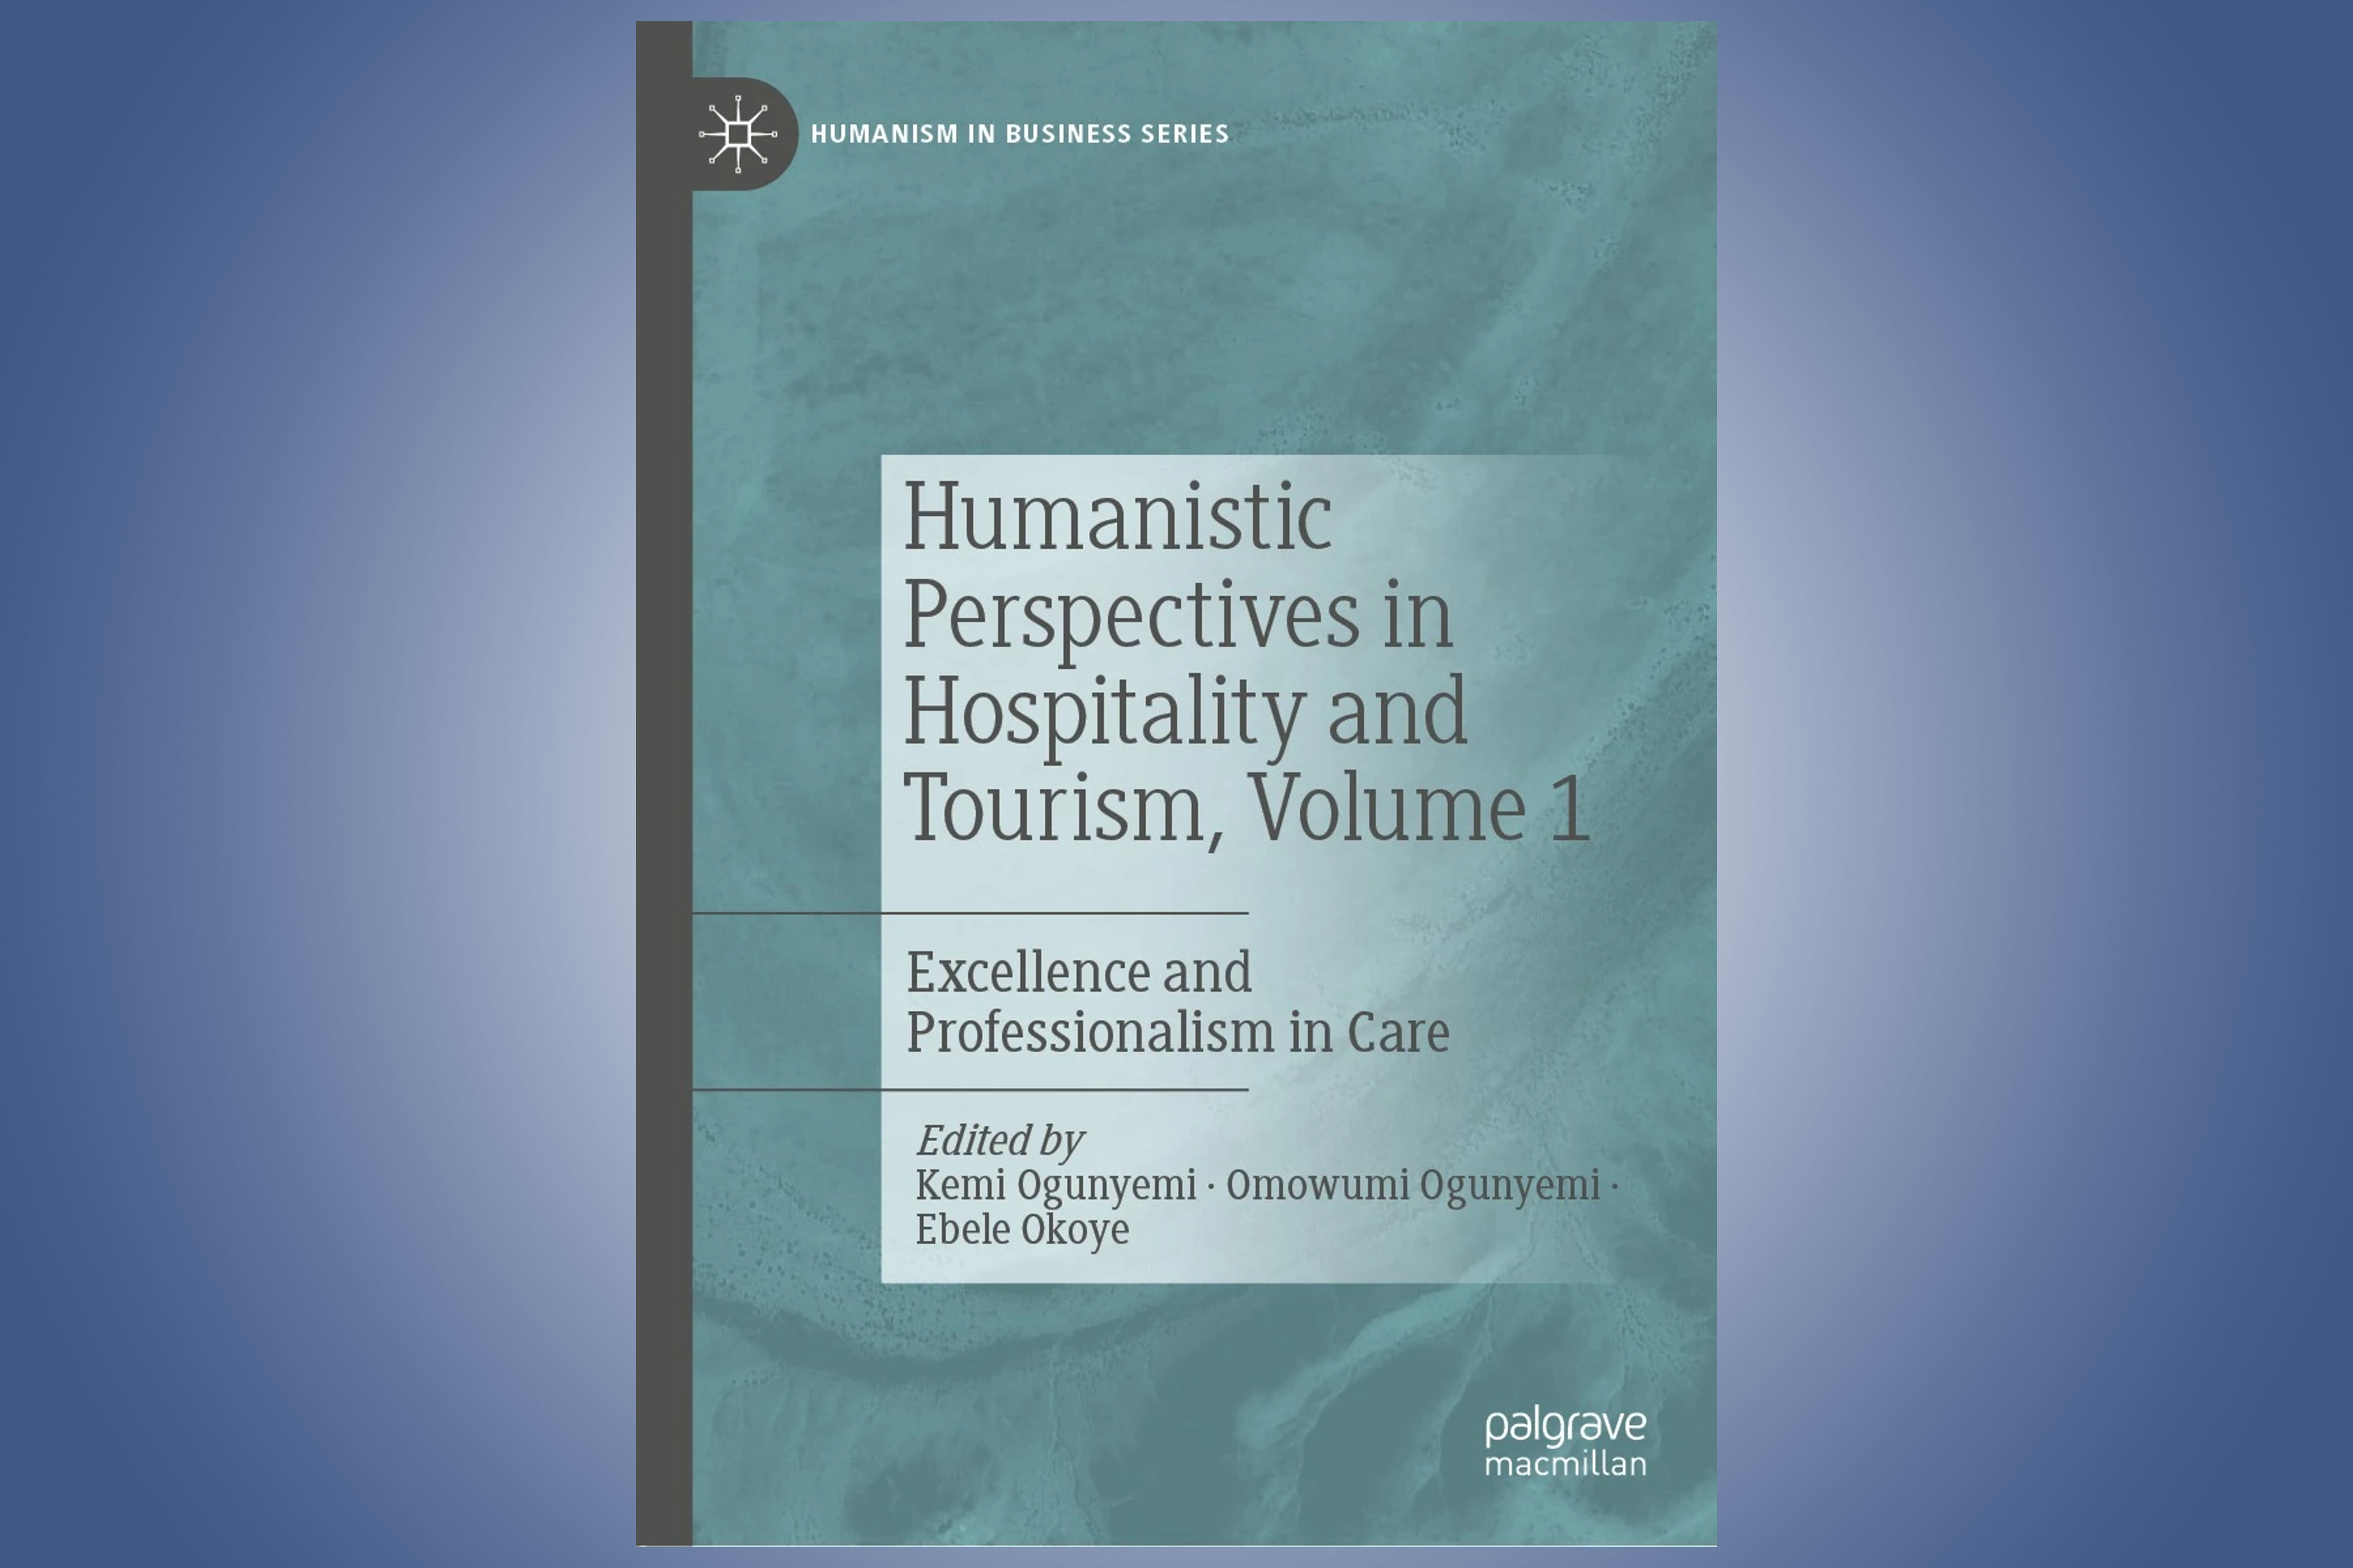 Humanistic Perspectives in Hospitality and Tourism, Volume 1 – Excellence and Professionalism in Care